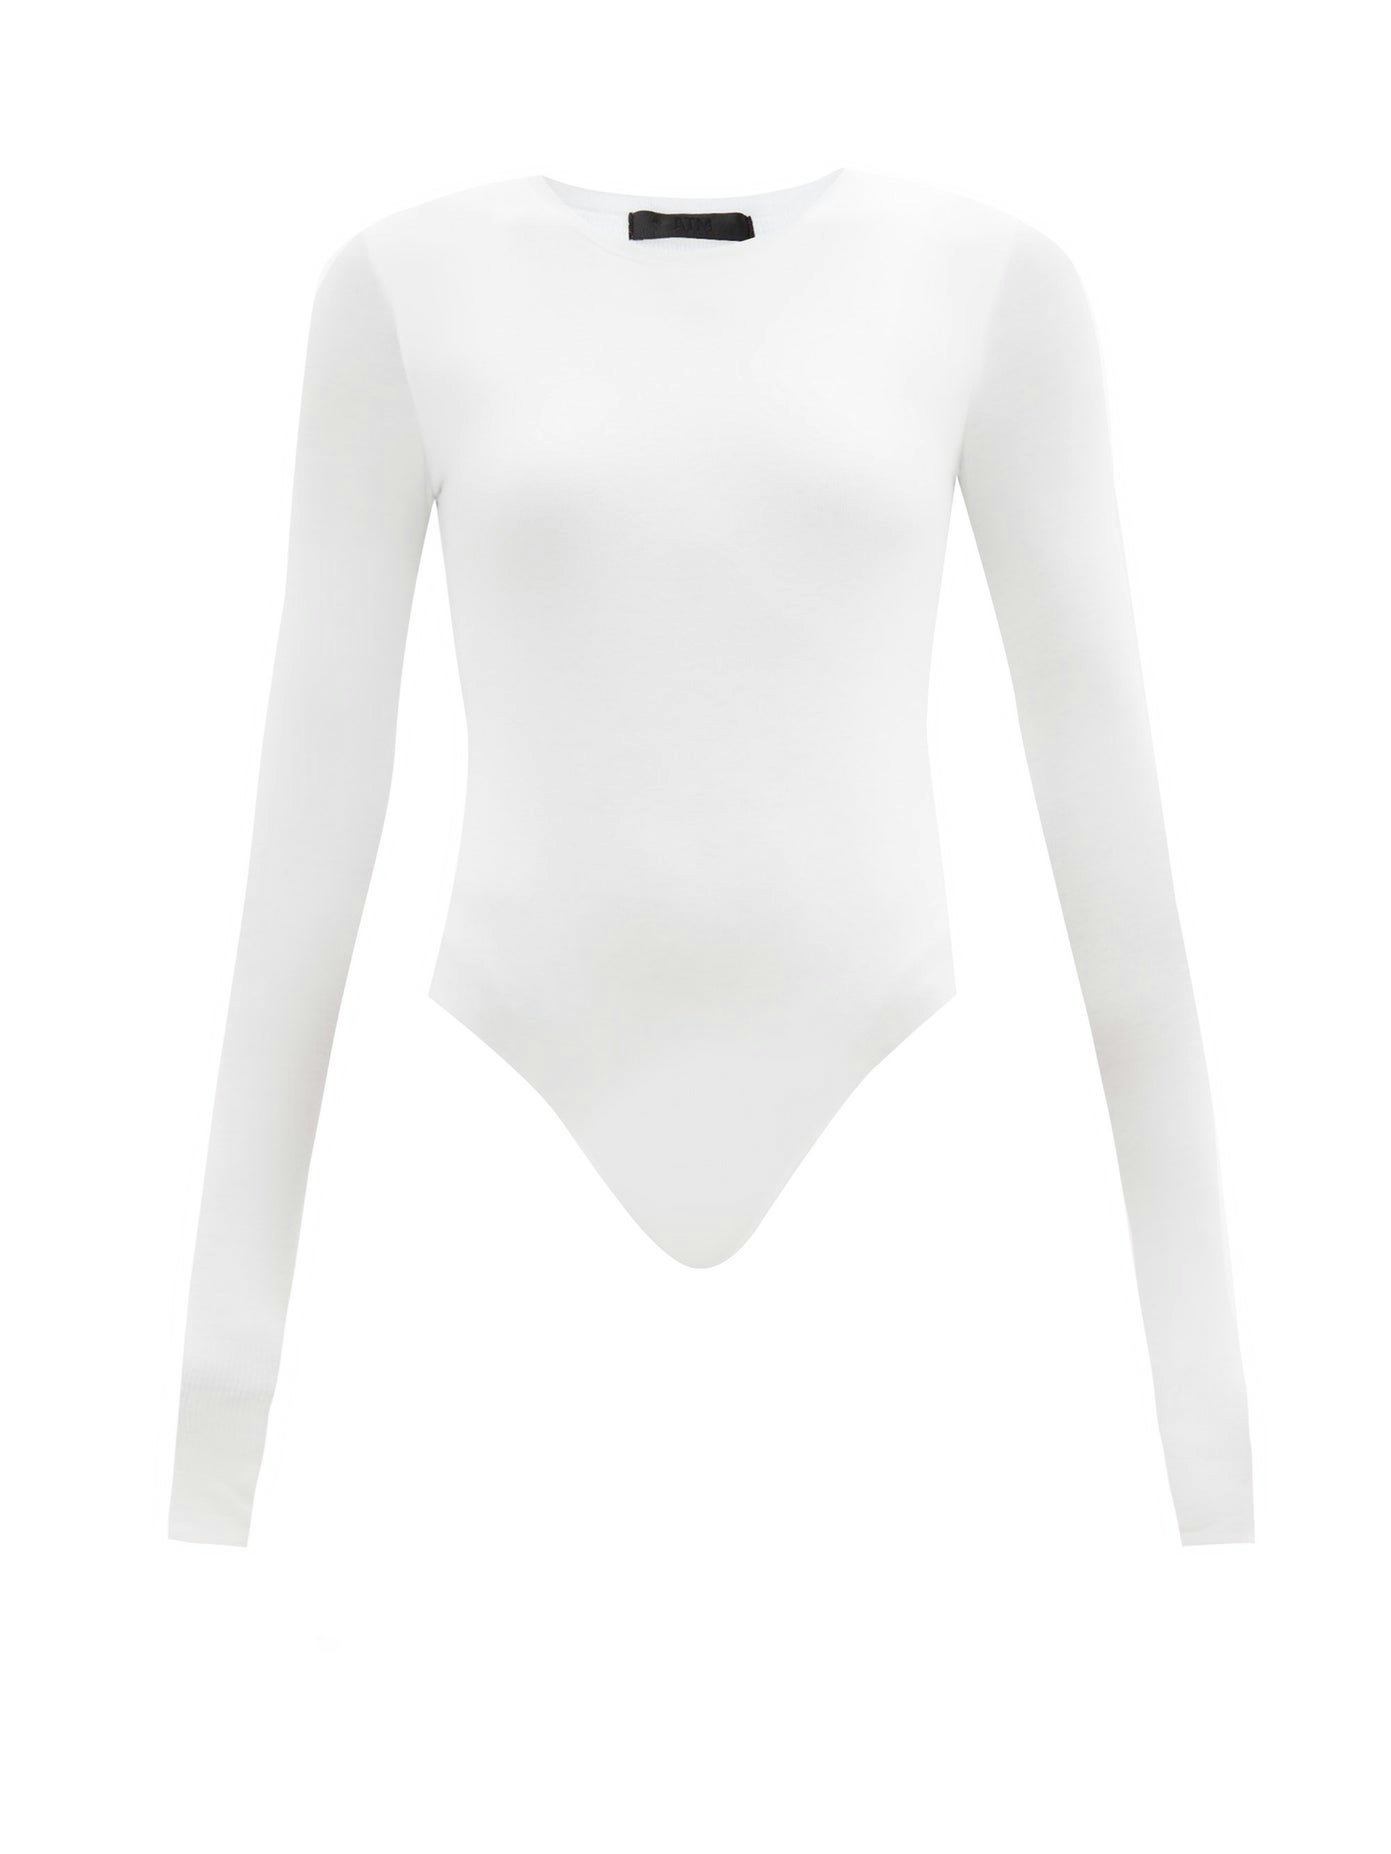 The $29.95 Zara bodysuit every woman needs this winter - approved by Rosie  Huntington-Whiteley